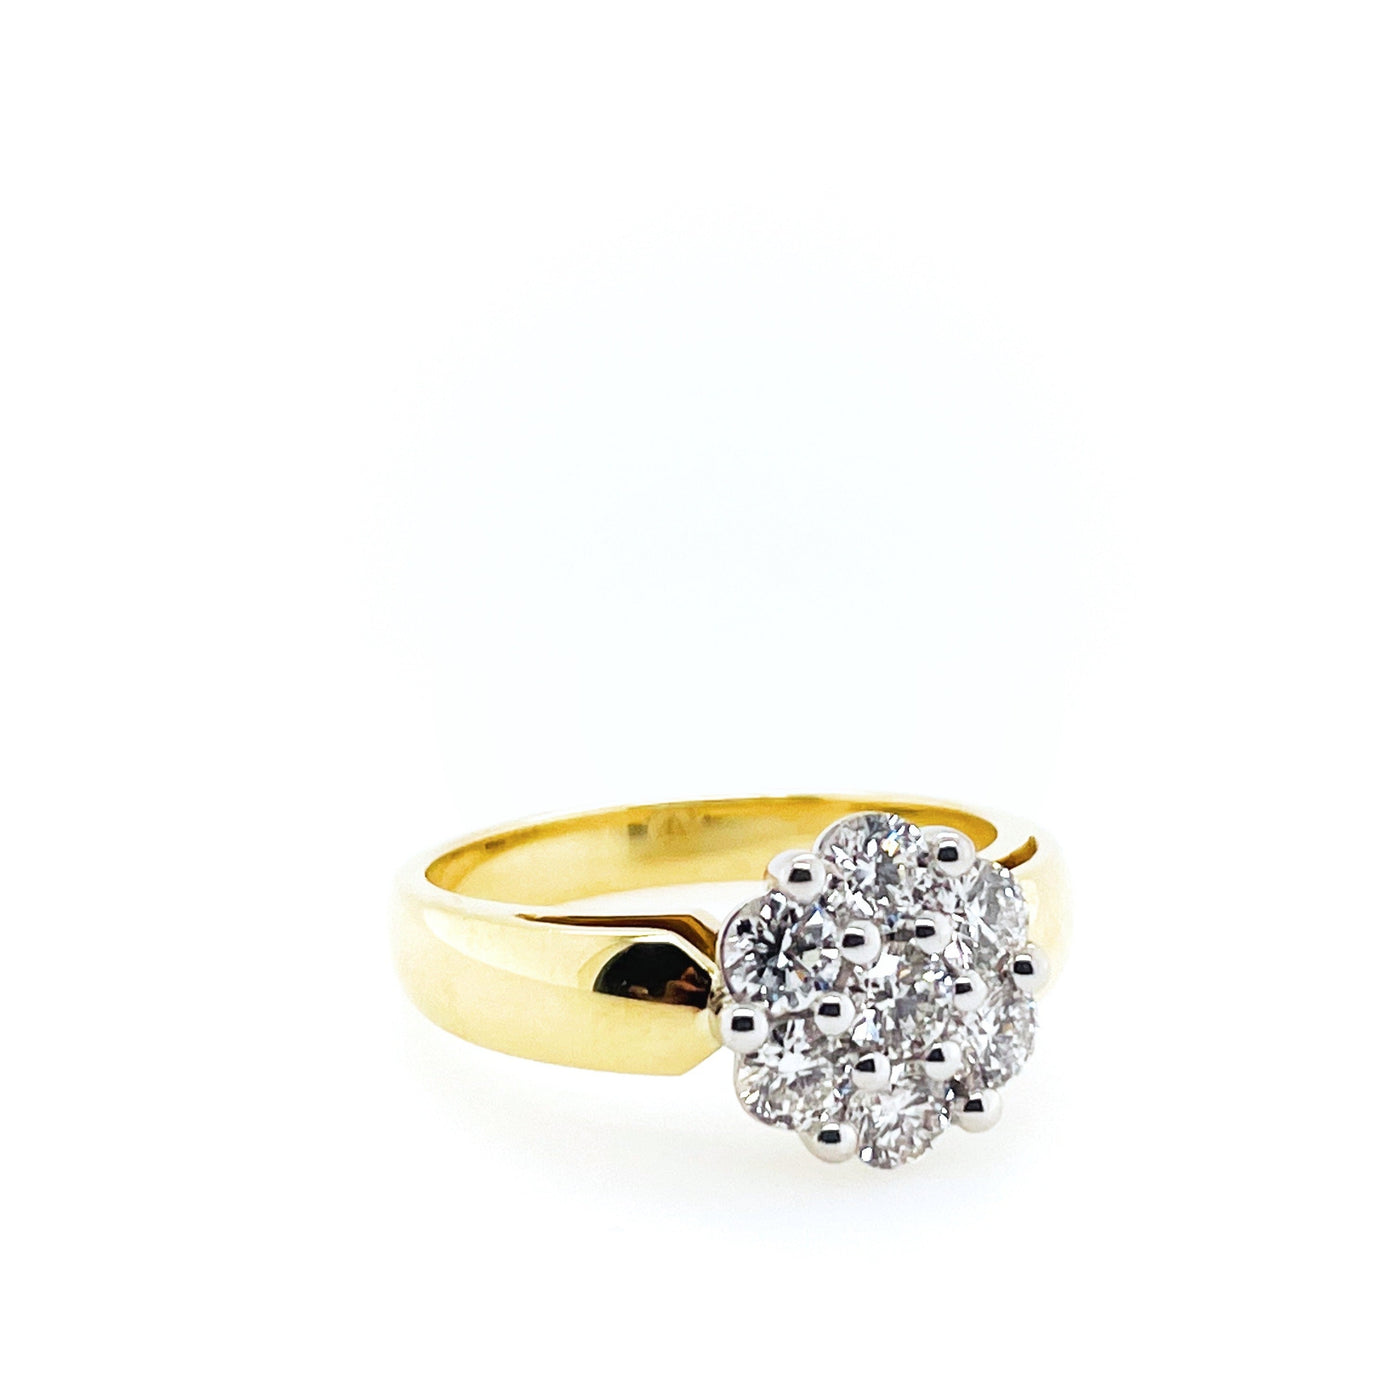 18ct Two Tone Diamond 0.97tdw Cluster Ring